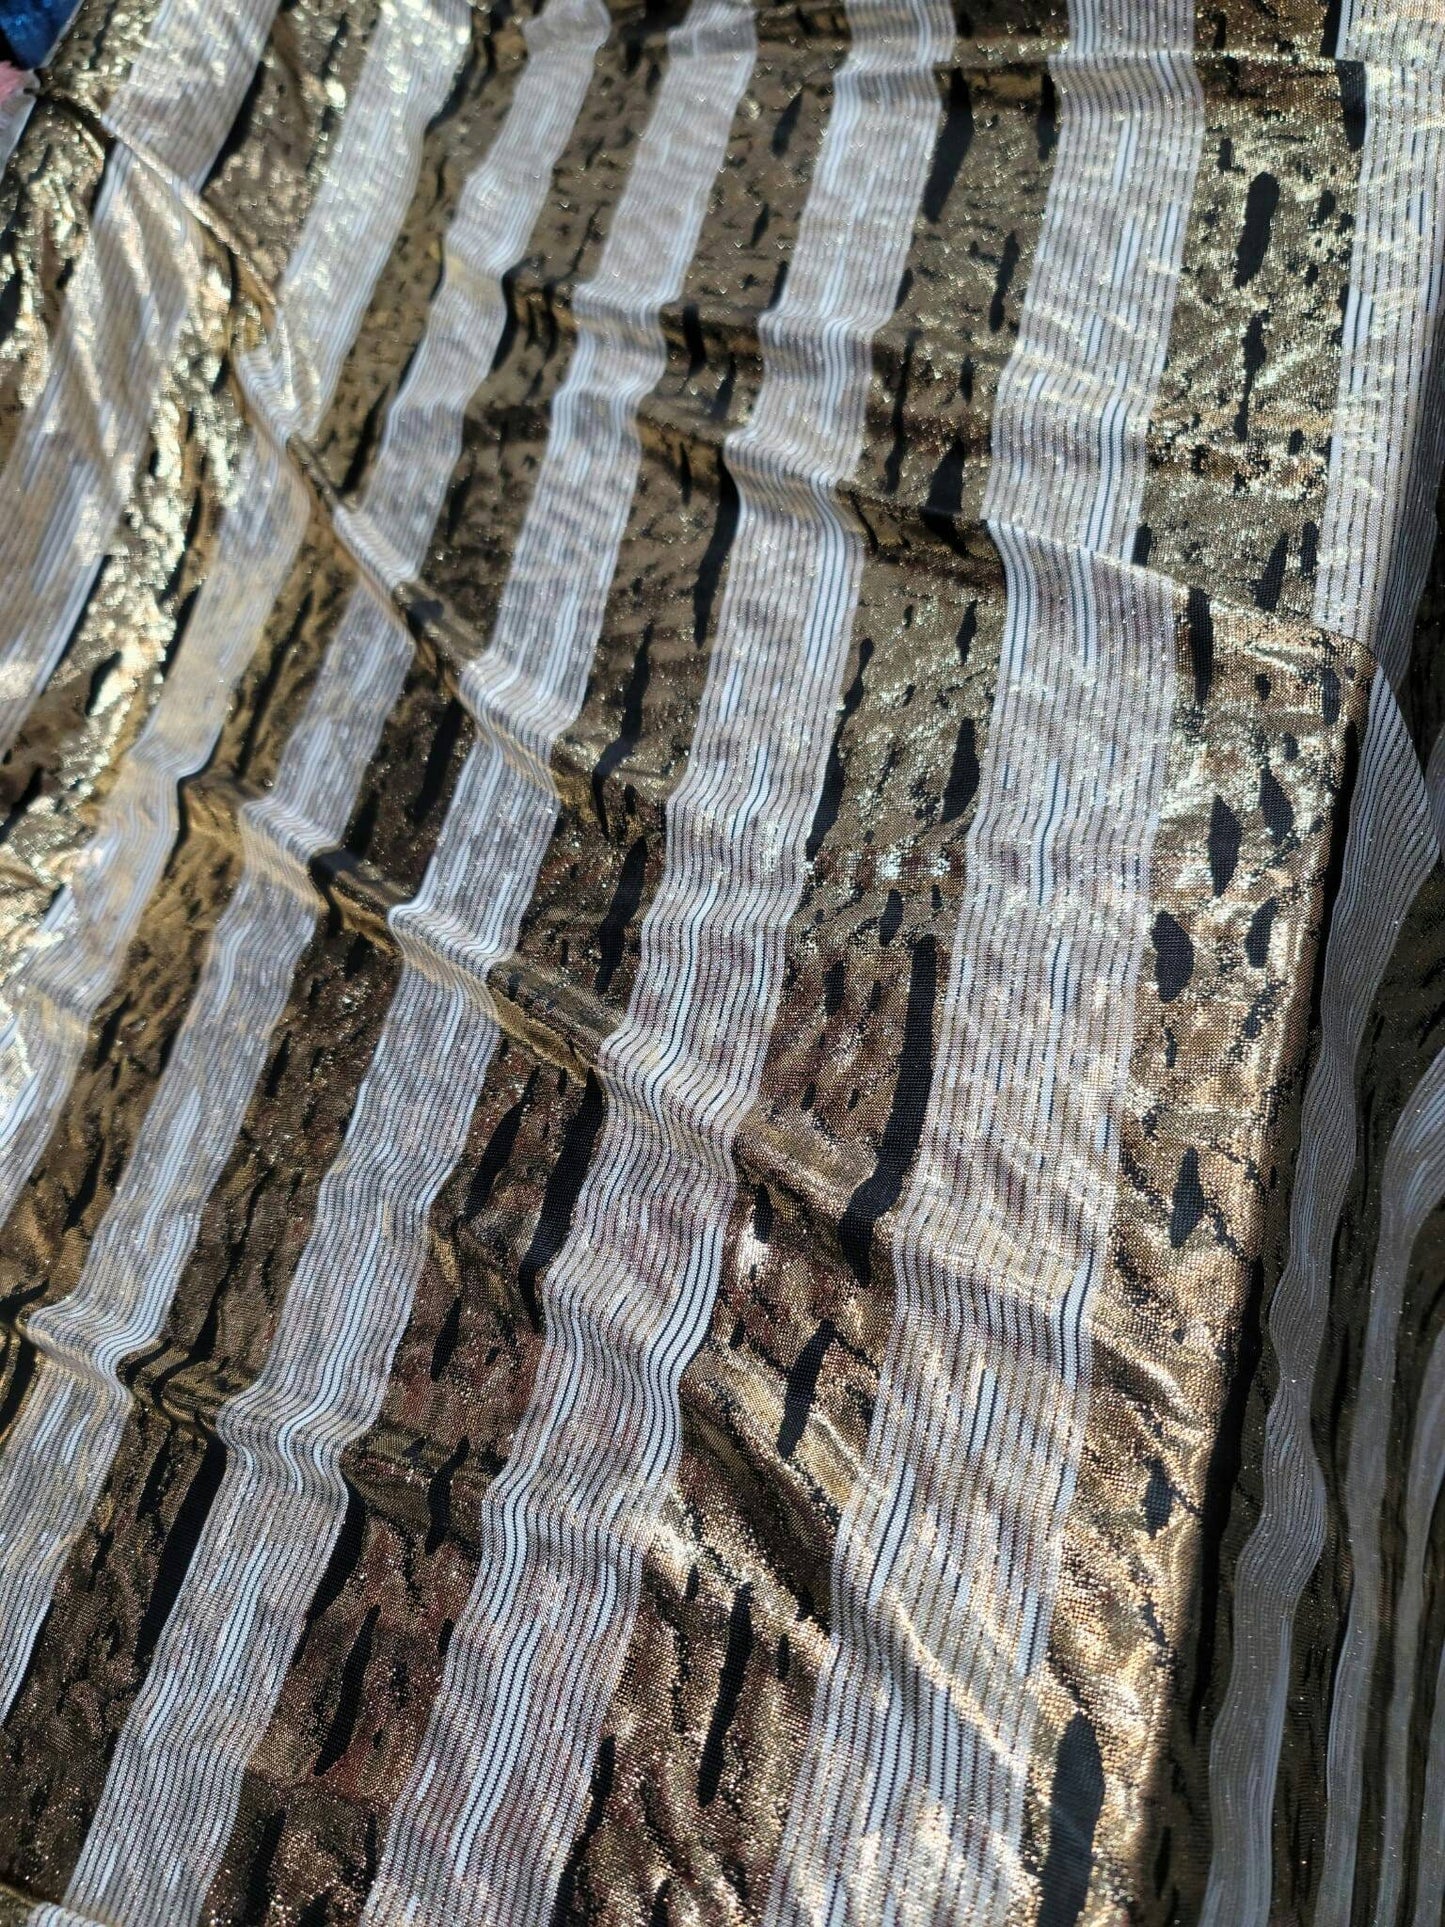 Gold Sparkly Metallic Black Striped Four Way Stretch Ivory Spandex Fabric Sold By The Yard Bridal Decoration Draping.